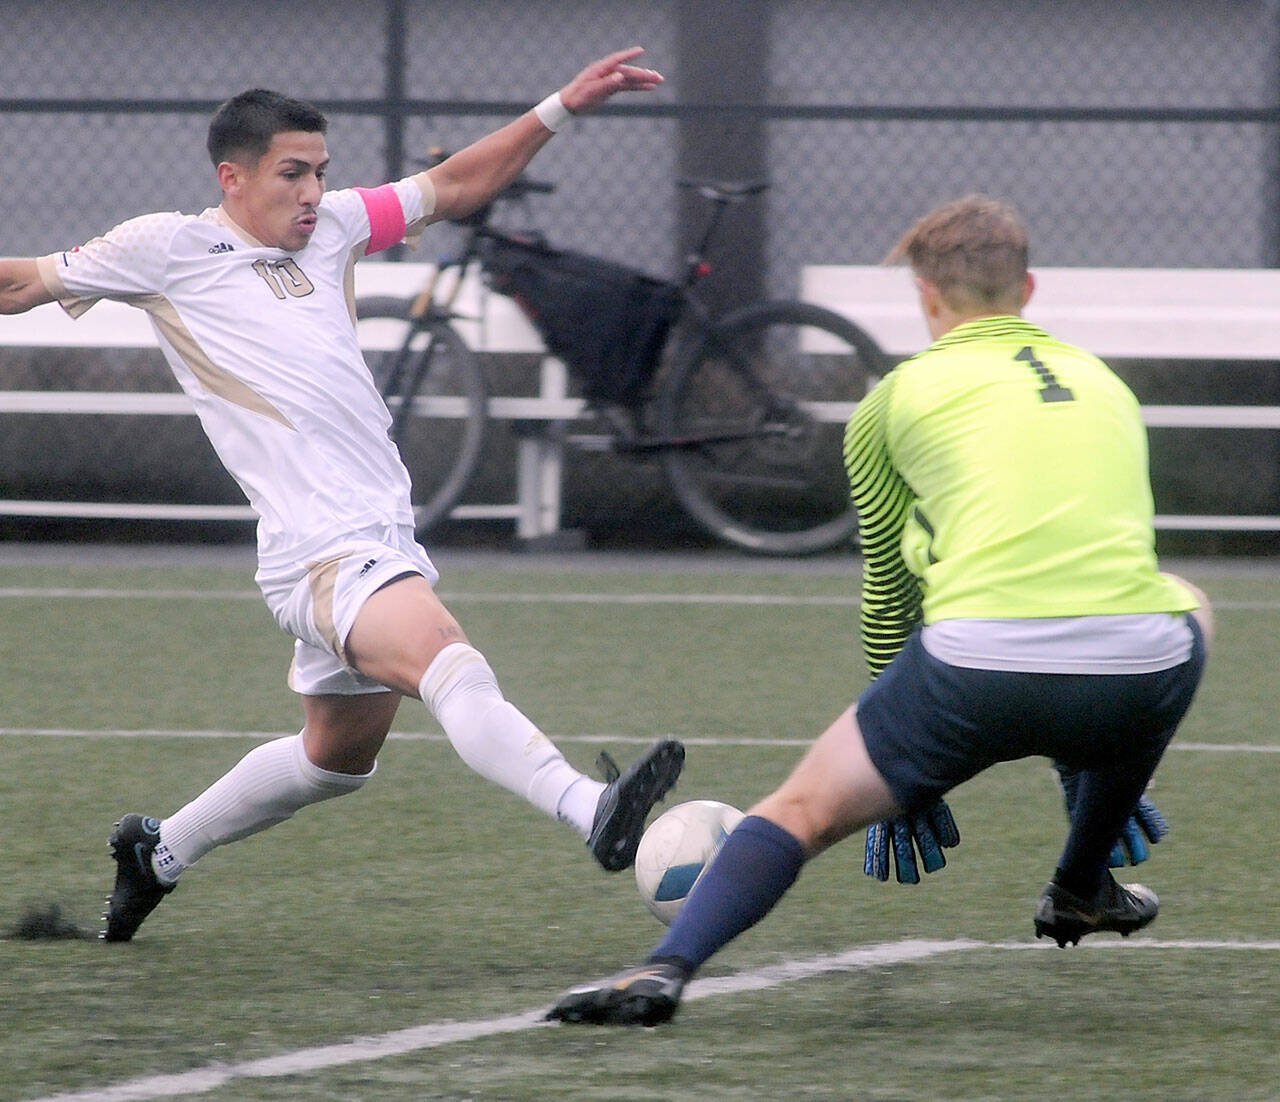 KEITH THORPE/PENINSULA DAILY NEWS Peninsula's Fernando Tavares (left) charges at Bellevue goaltender Nicola Luongo, narrowly missing a goal in the first quarter on Wednesday at Wally Sigmar Field.